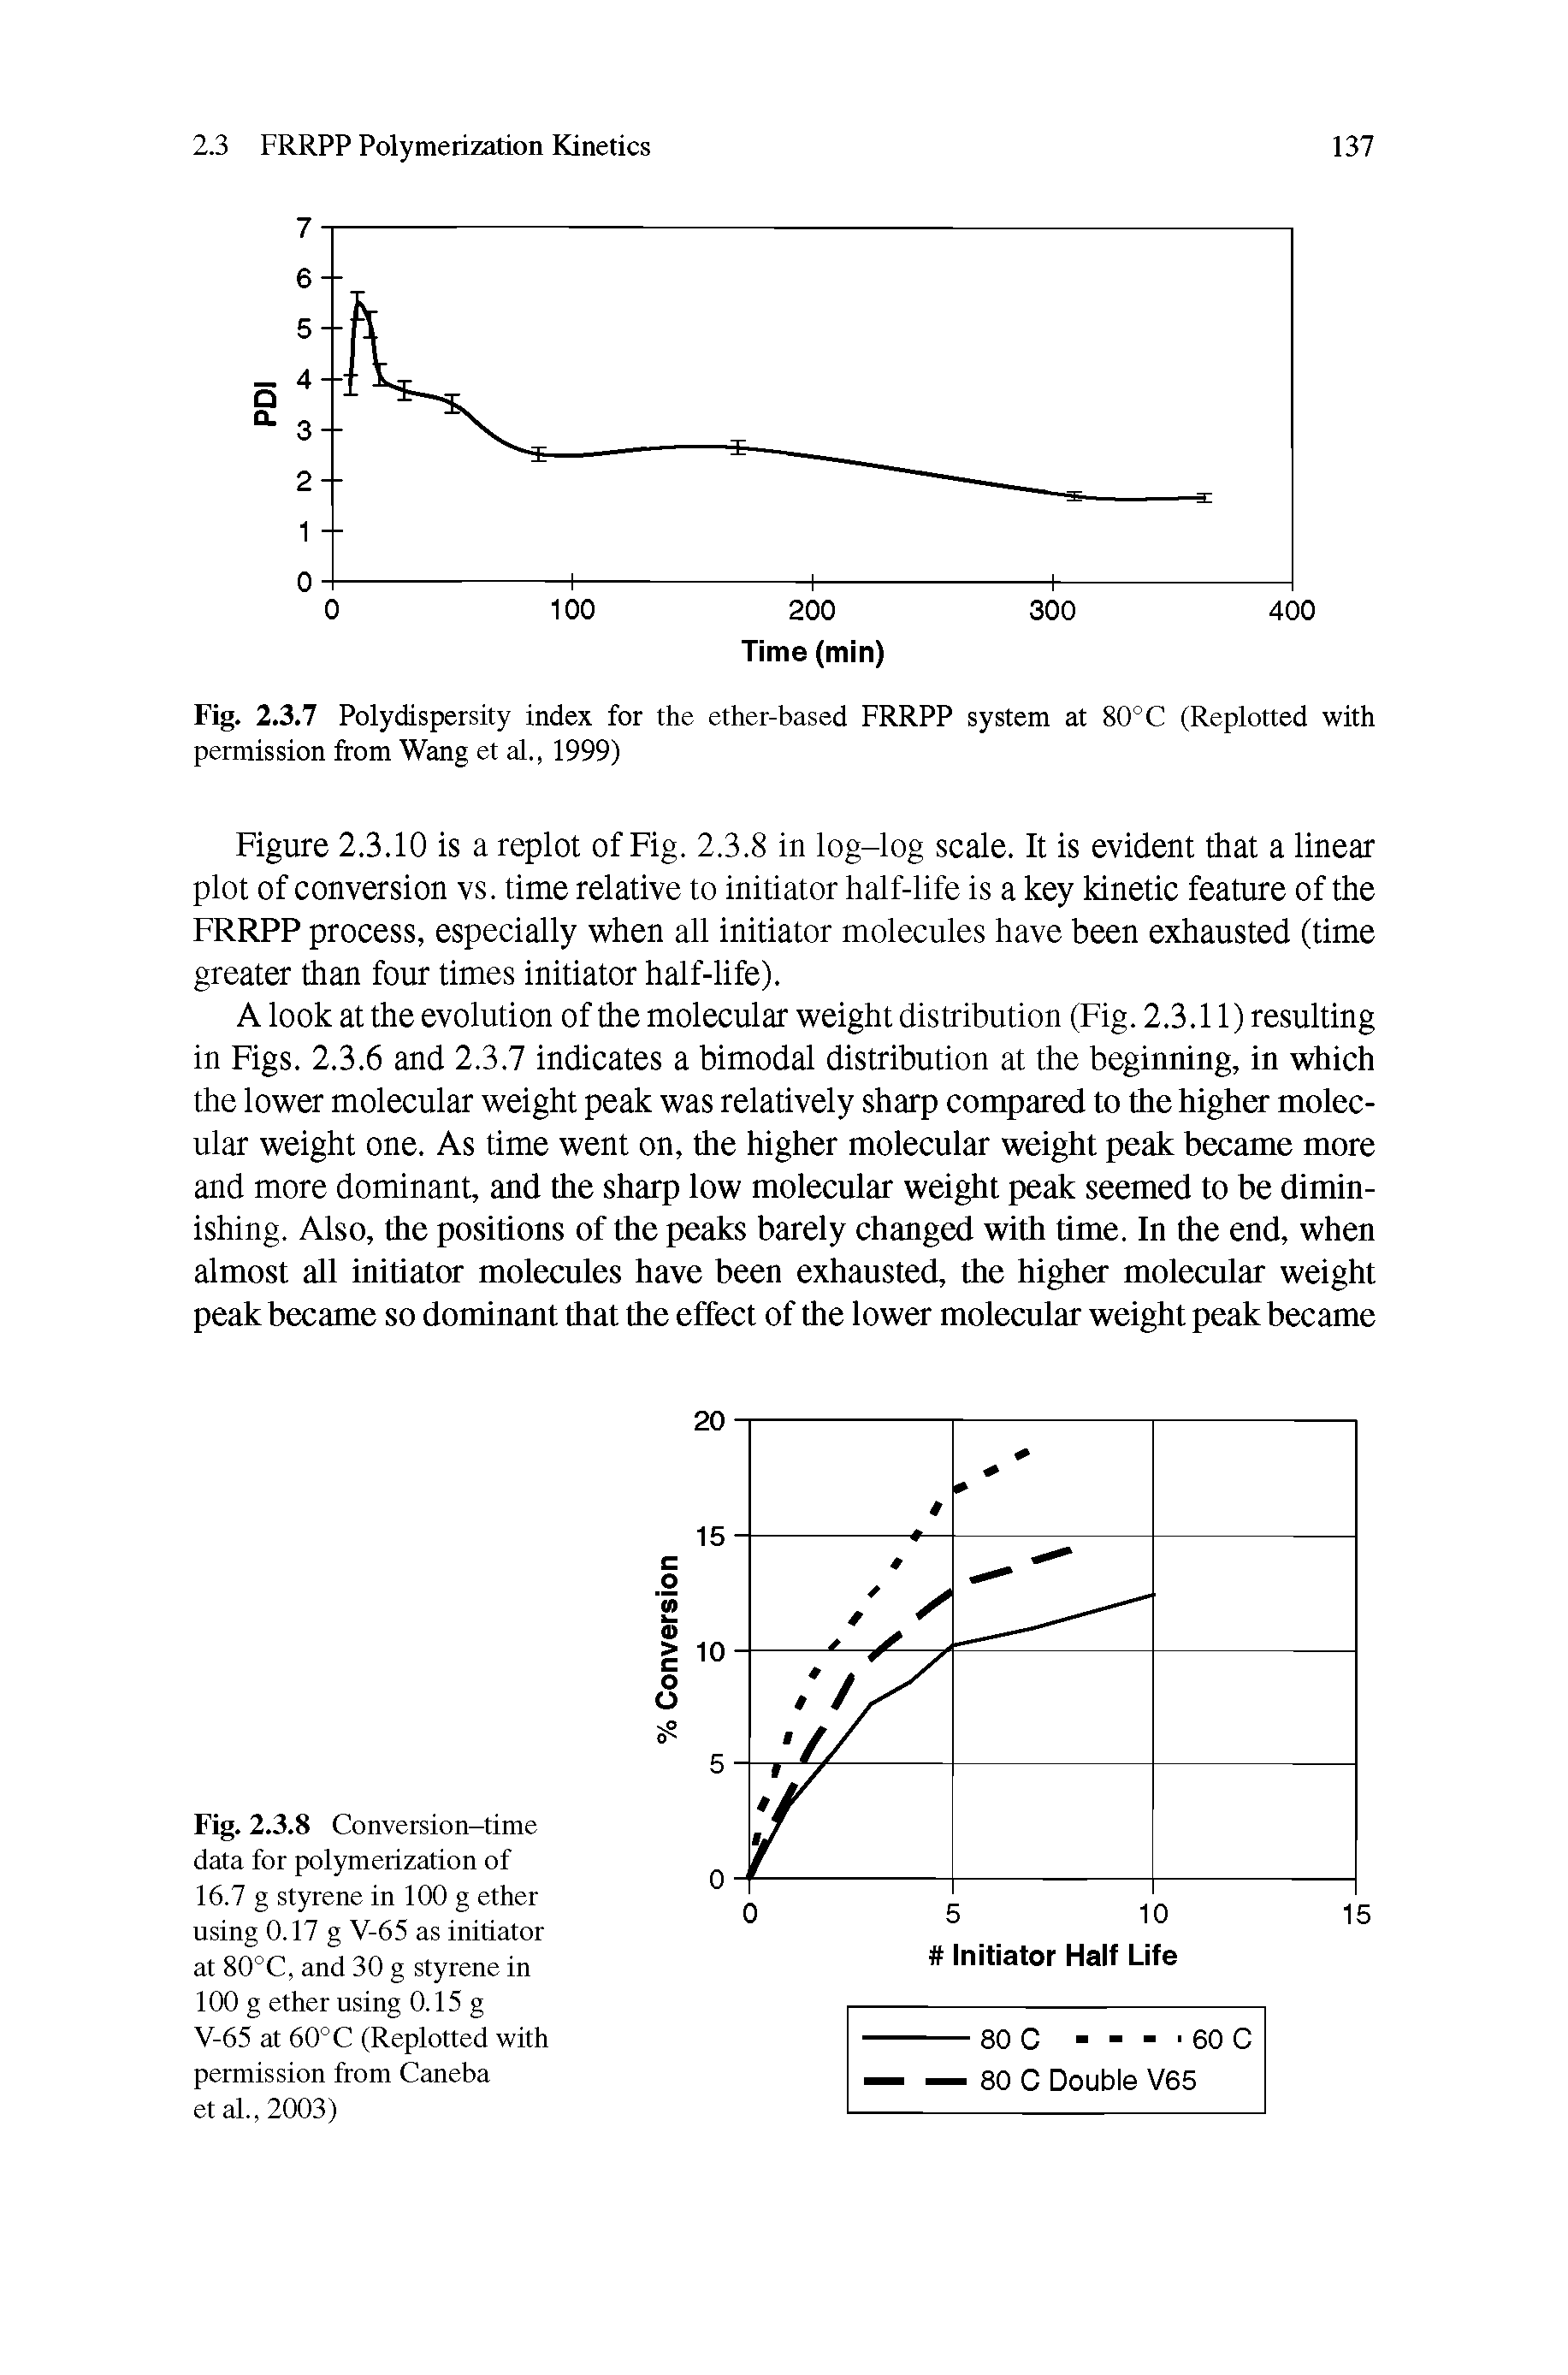 Fig. 2.3.8 Conversion-time data for polymerization of 16.7 g styrene in 100 g ether using 0.17 g V-65 as initiator at 80°C, and 30 g styrene in 100 g ether using 0.15 g V-65 at 60° C (Replotted with permission from Caneba etal.,2003)...